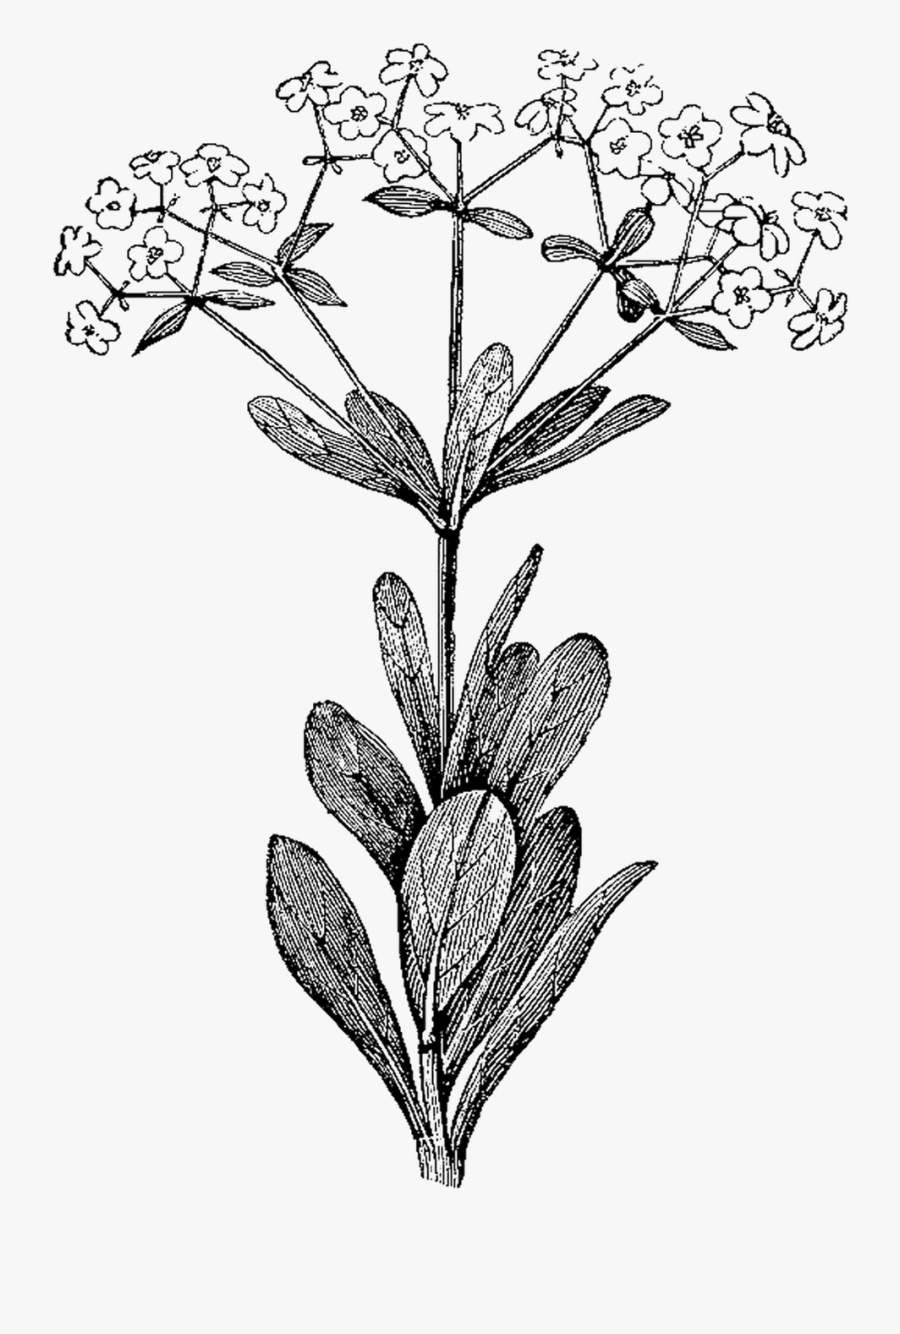 Clip Art Drawings Of Herbs - Botanical Illustrations Black And White, Transparent Clipart